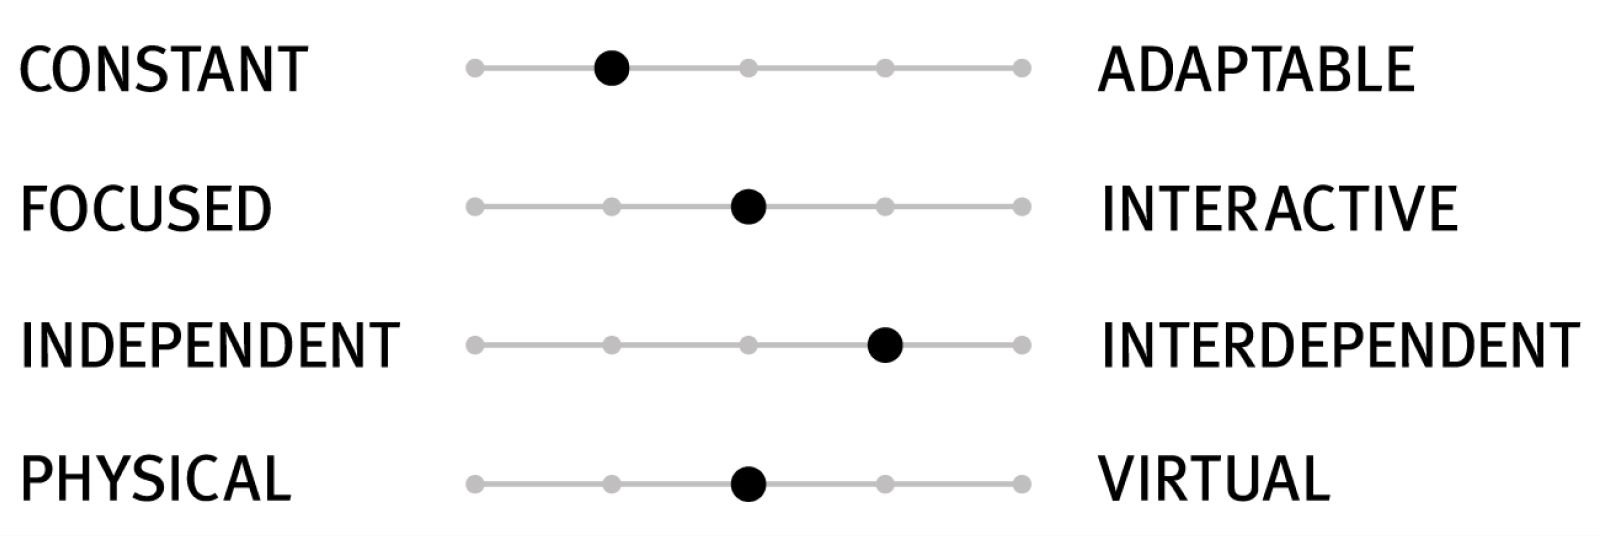 A scale with four sets of sliders that indicate the design characteristics of a setting. These sliders show a fairly constant configuration that balances focus with interactivity, and considerations for both in-person and remote team members, with moderate support for interdependencies.